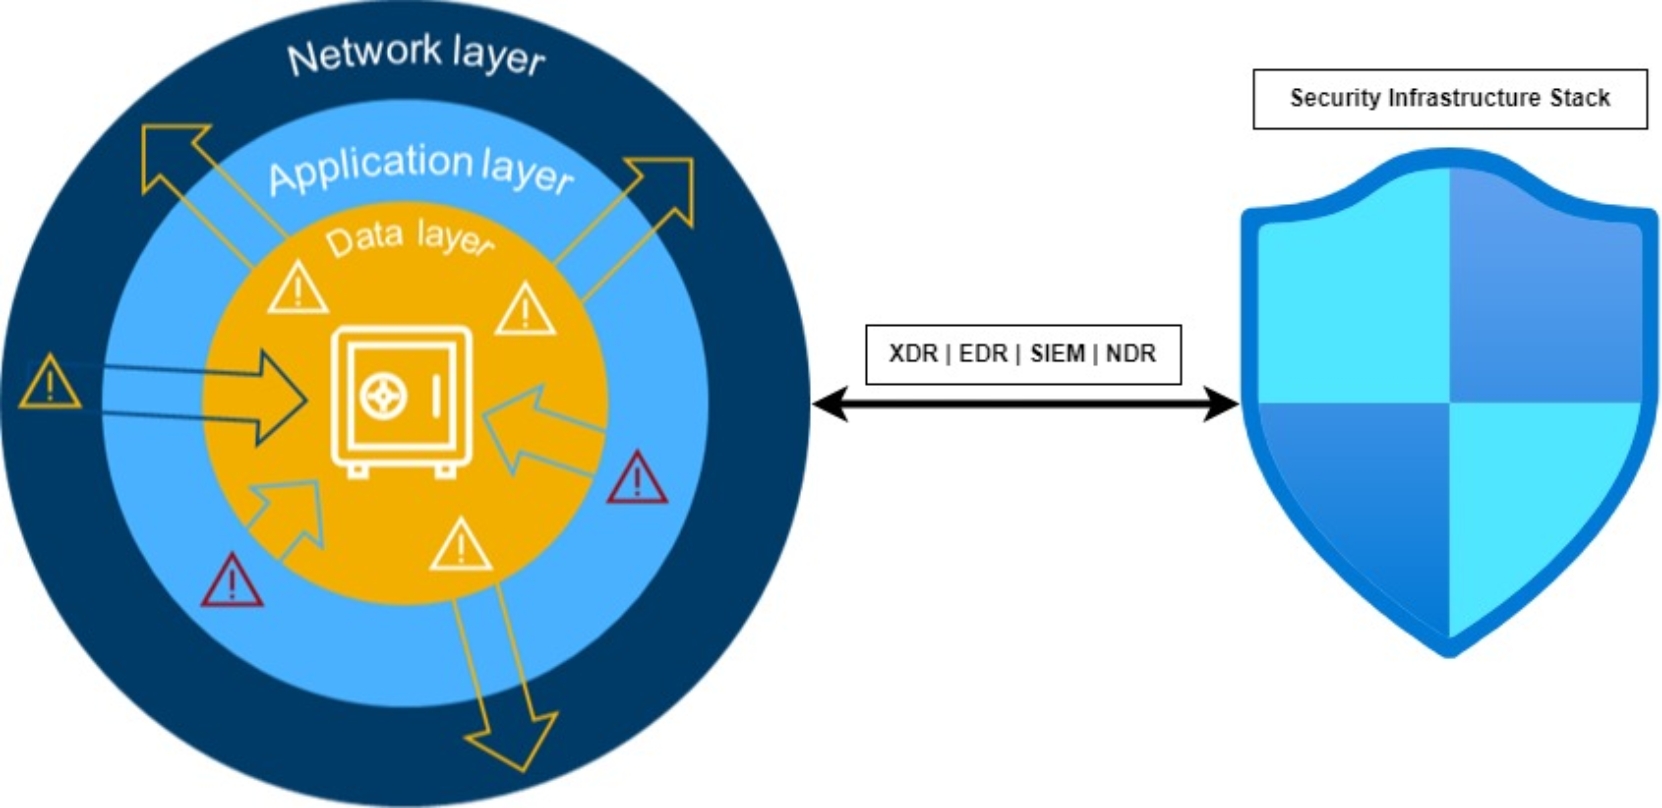 This shows the architecture of the zero trust API, including the network layer, app layer, and data layer.